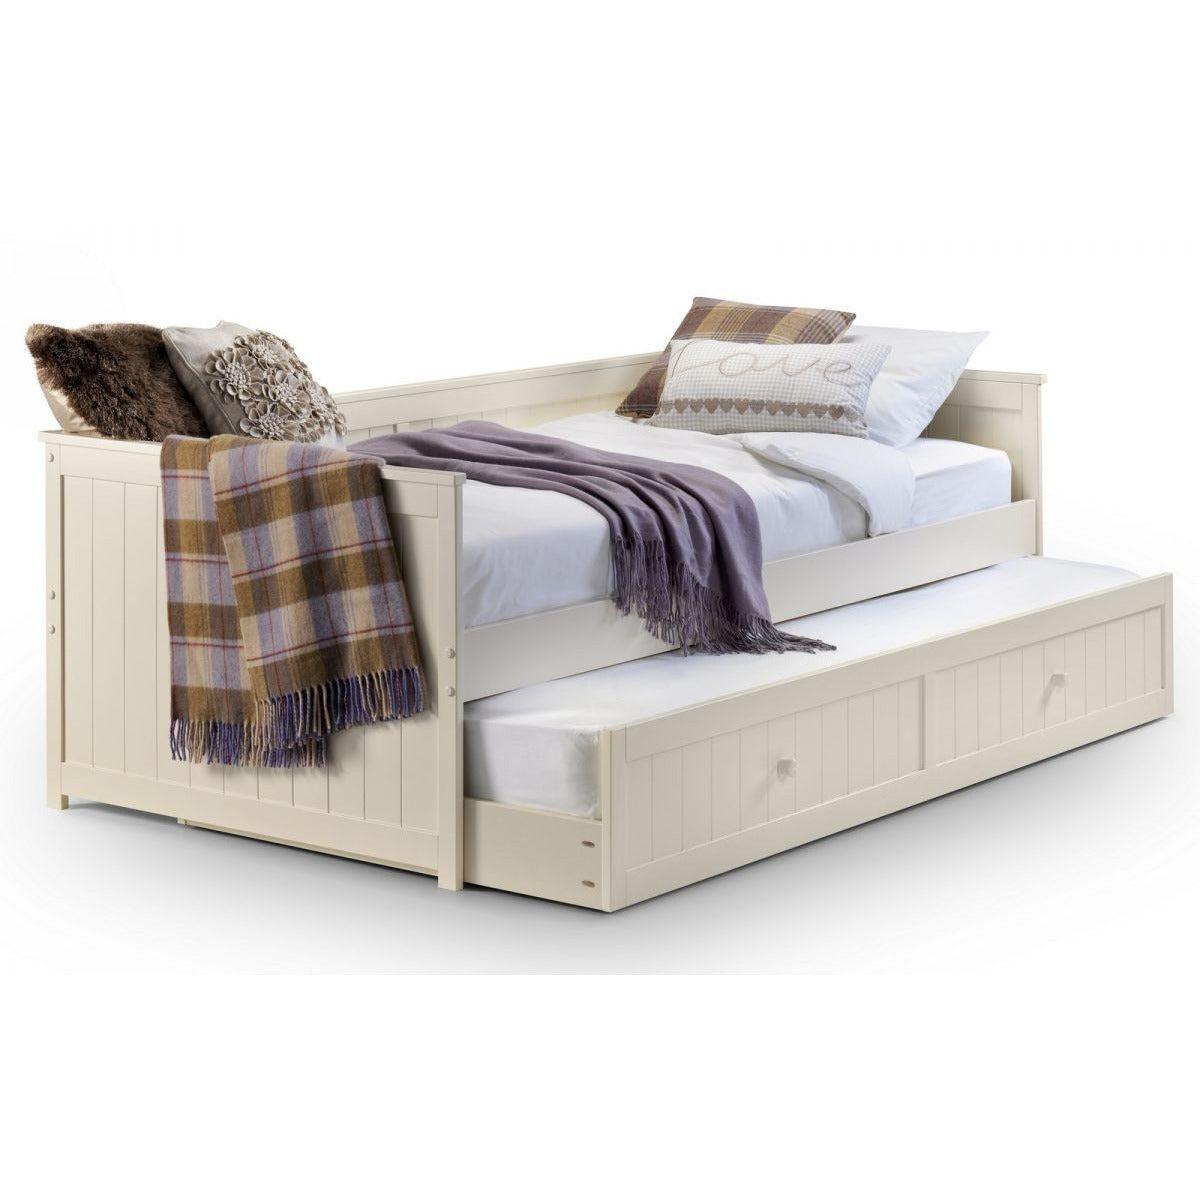 JESSICA DAY BED WITH UNDER BED